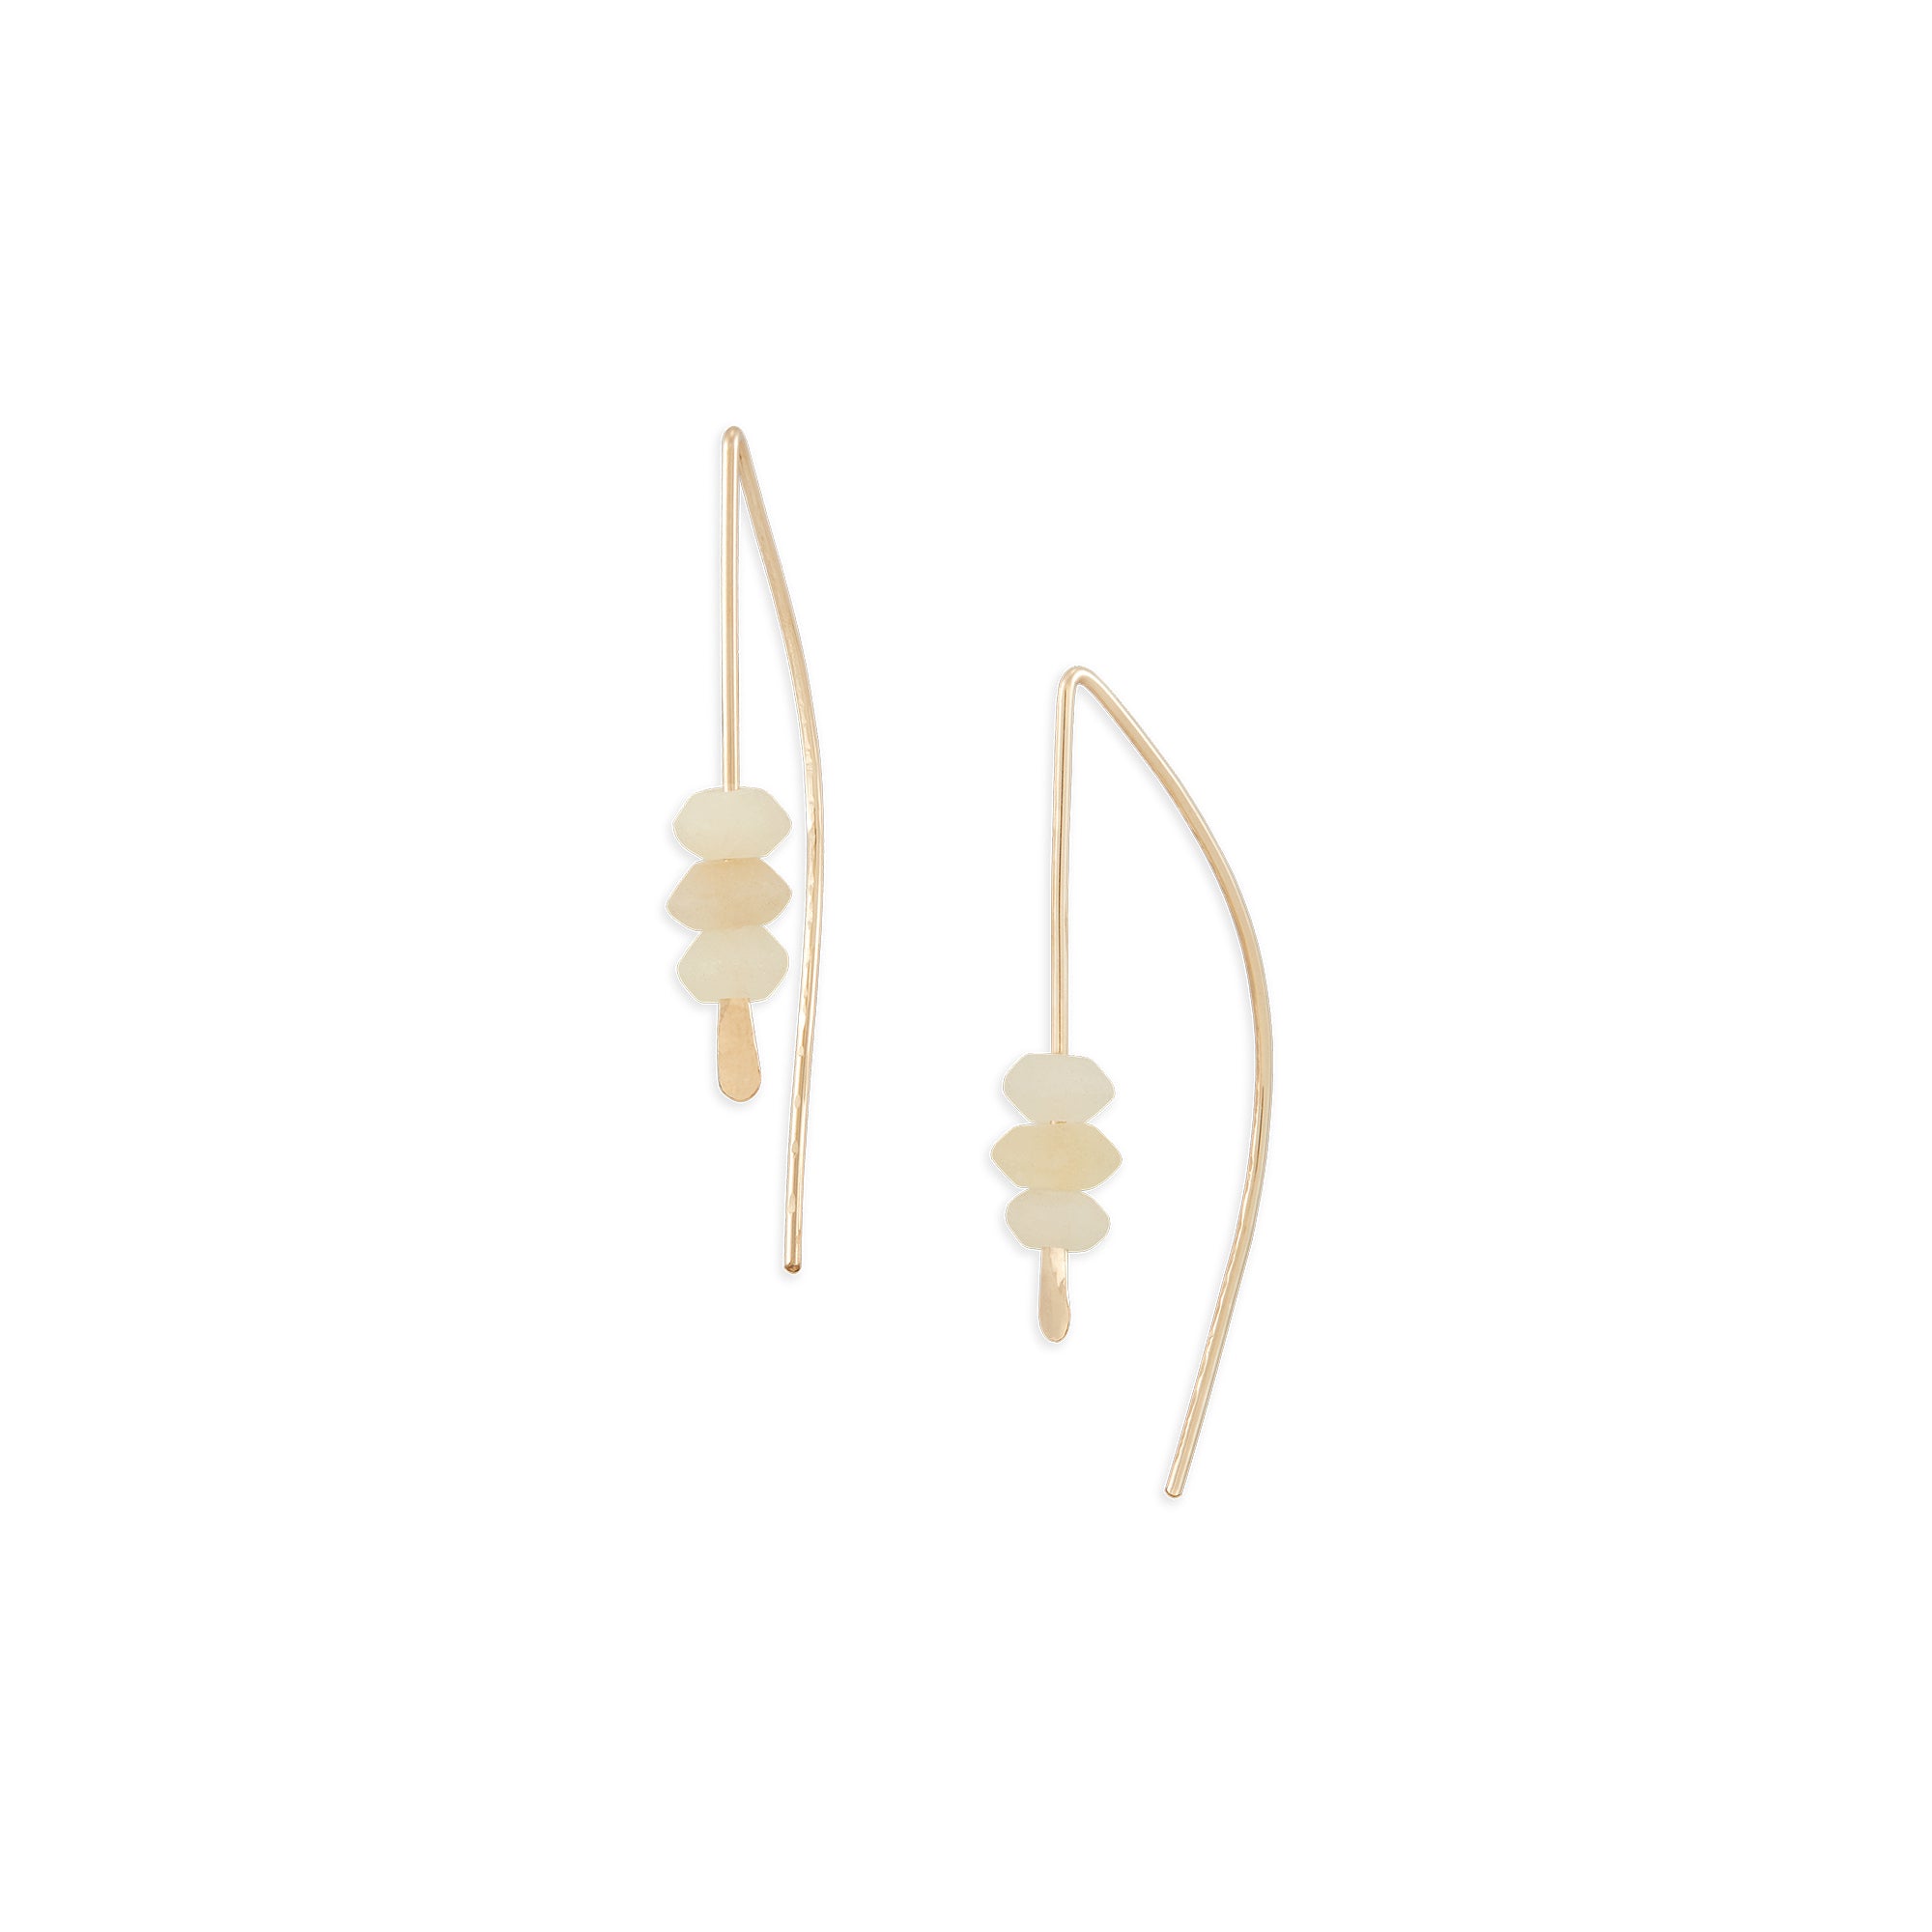 A modern threader earring with a pop of color from semi-precious onyx stones, the arch earring is sure to be a staple piece.